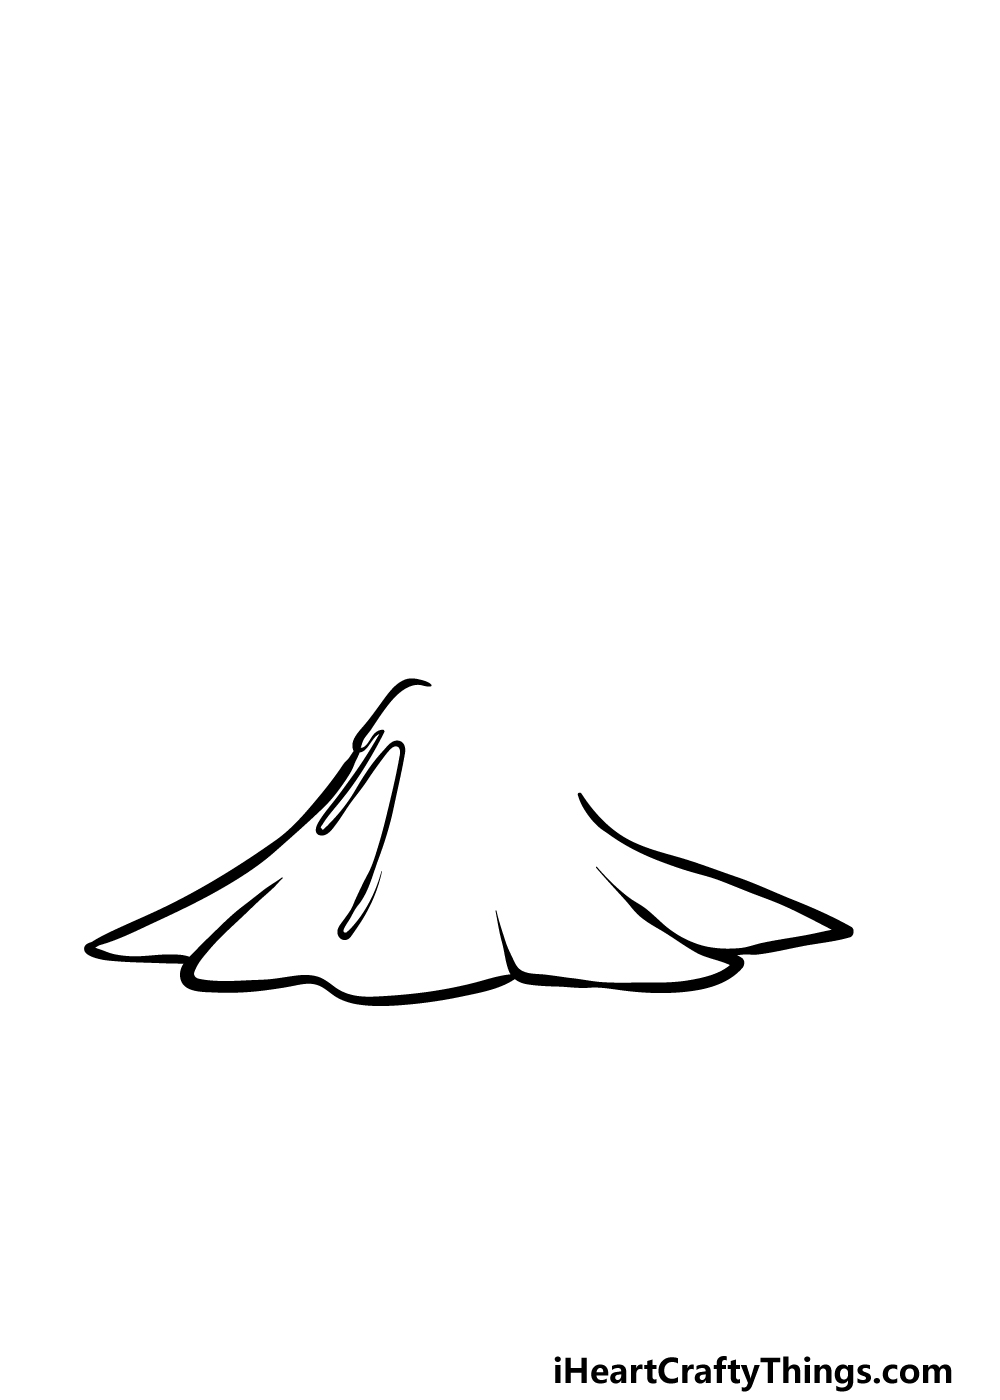 Cartoon Volcano Drawing - How To Draw A Cartoon Volcano Step By Step